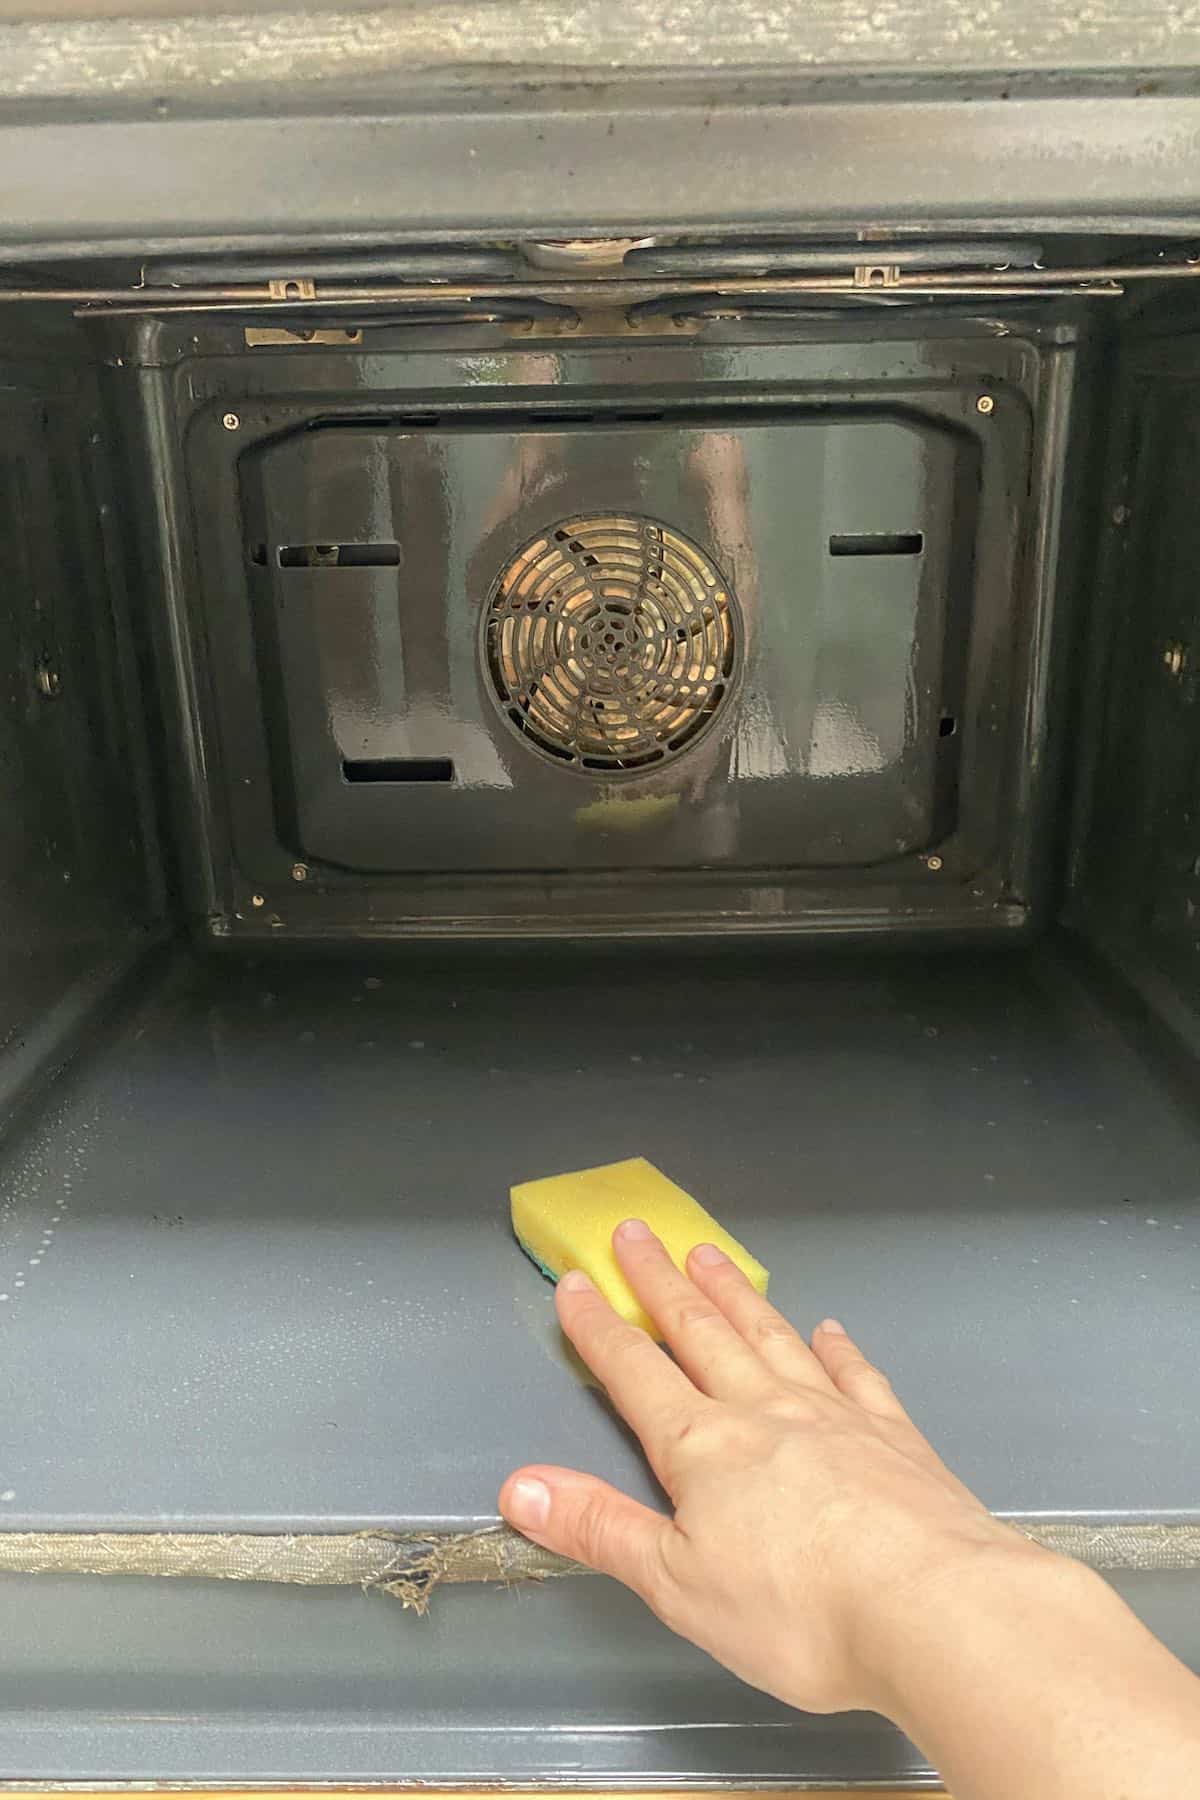 Using a sponge to clean oven